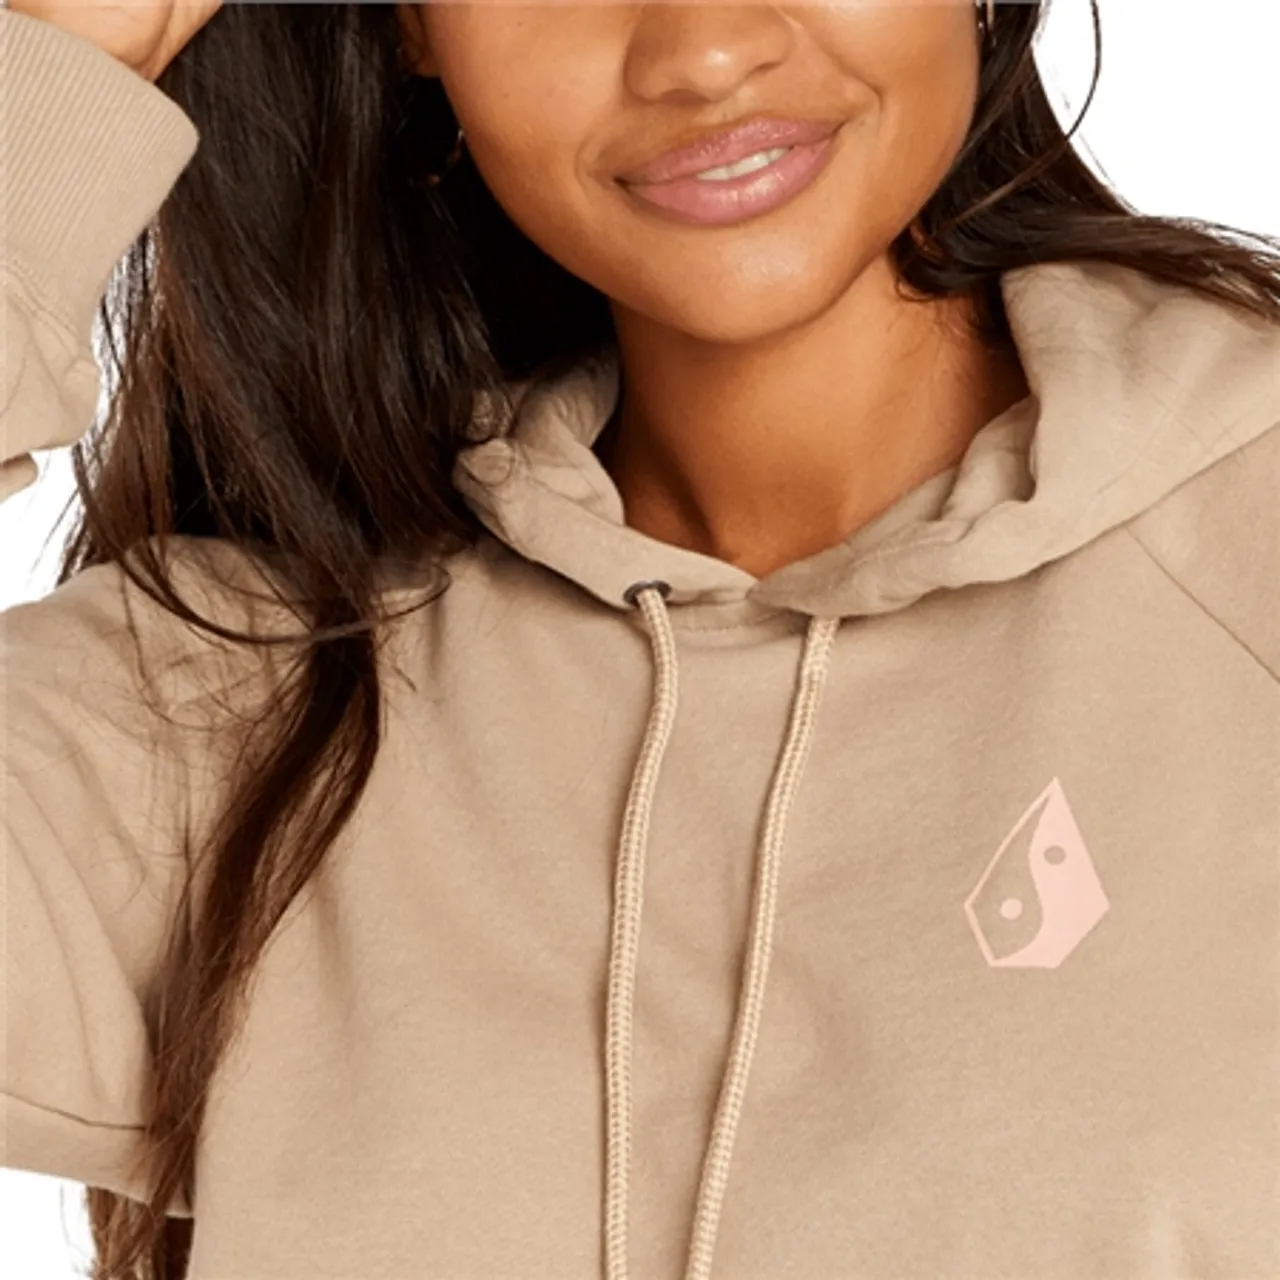 Volcom Truly Stoked Hoody - Taupe